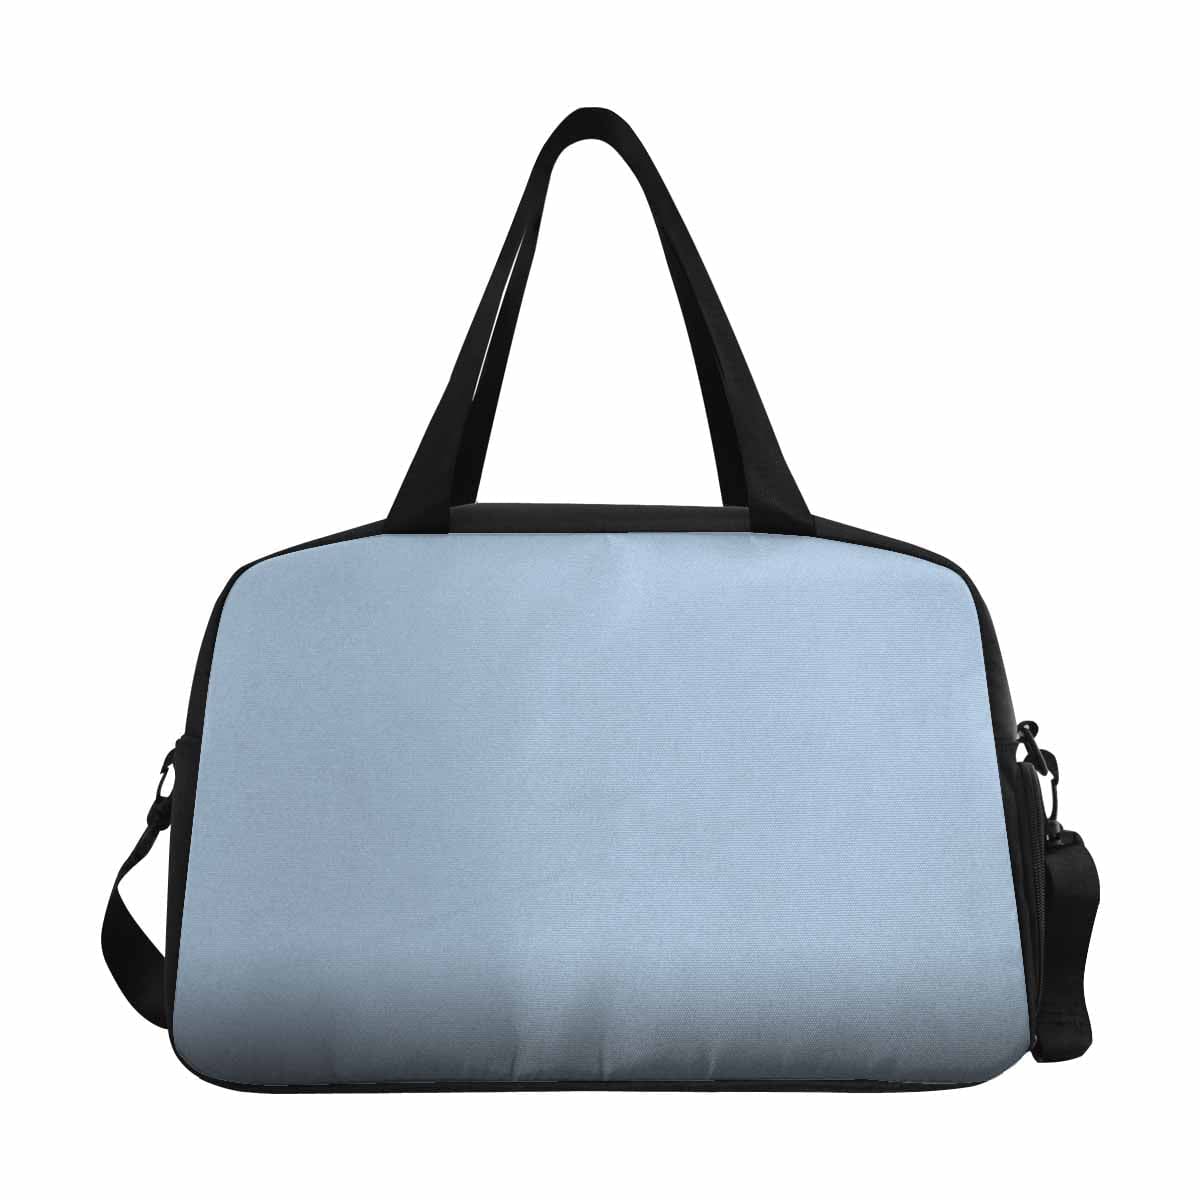 Serenity Blue Tote And Crossbody Travel Bag - Bags | Travel Bags | Crossbody